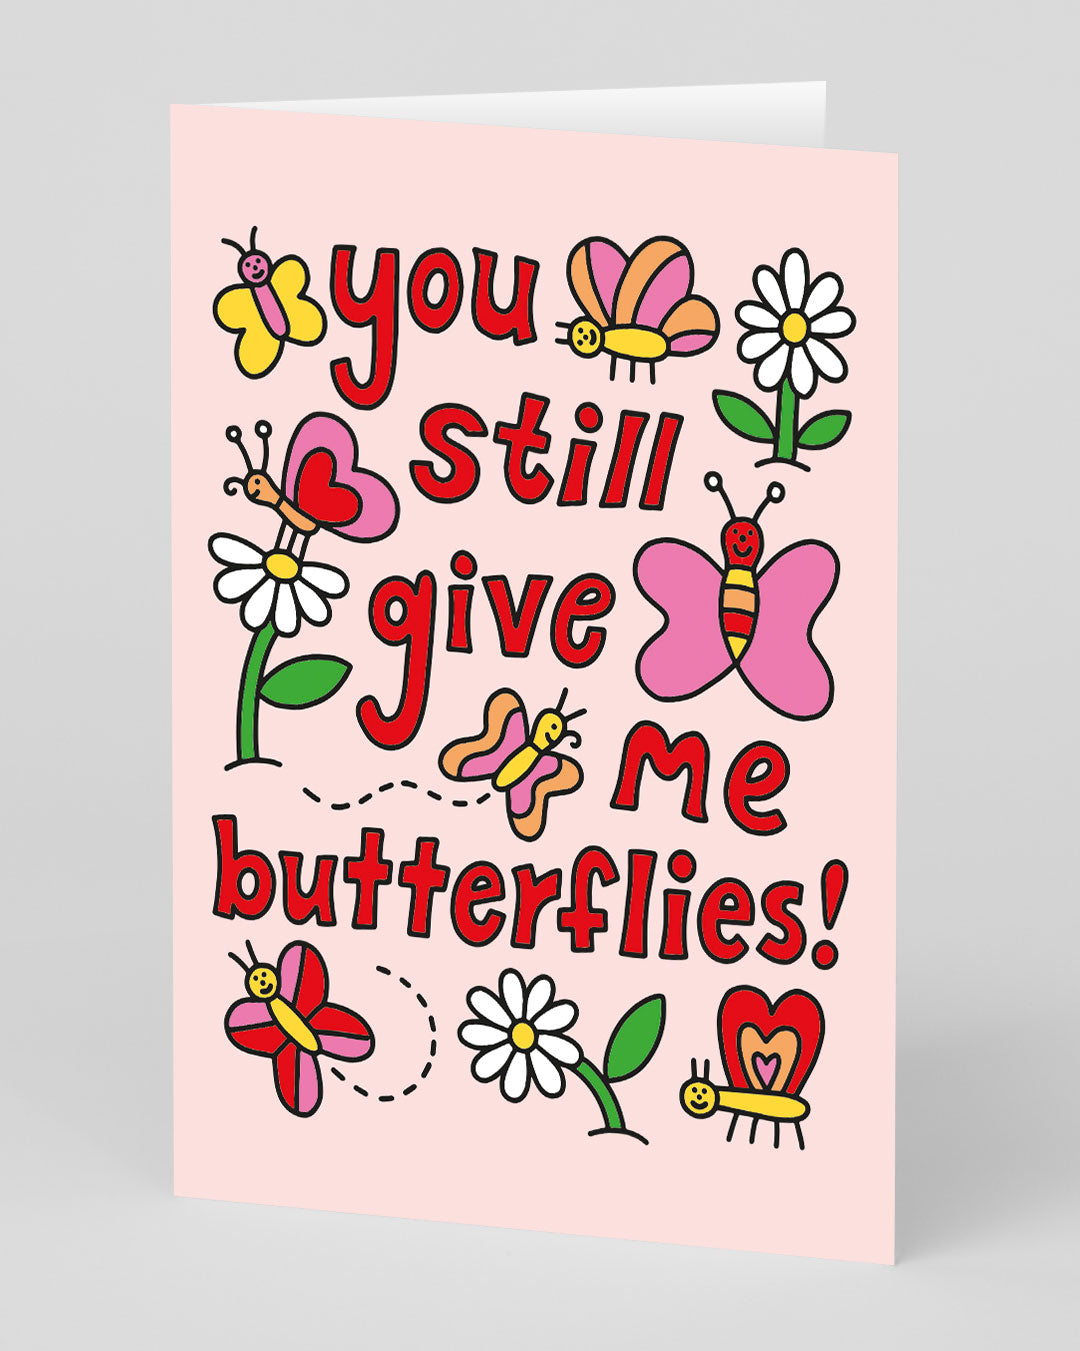 Valentine’s Day | Cute Valentines Card For Him or Her | You Still Give Me Butterflies Greeting Card | Ohh Deer Unique Valentine’s Card | Made In The UK, Eco-Friendly Materials, Plastic Free Packaging